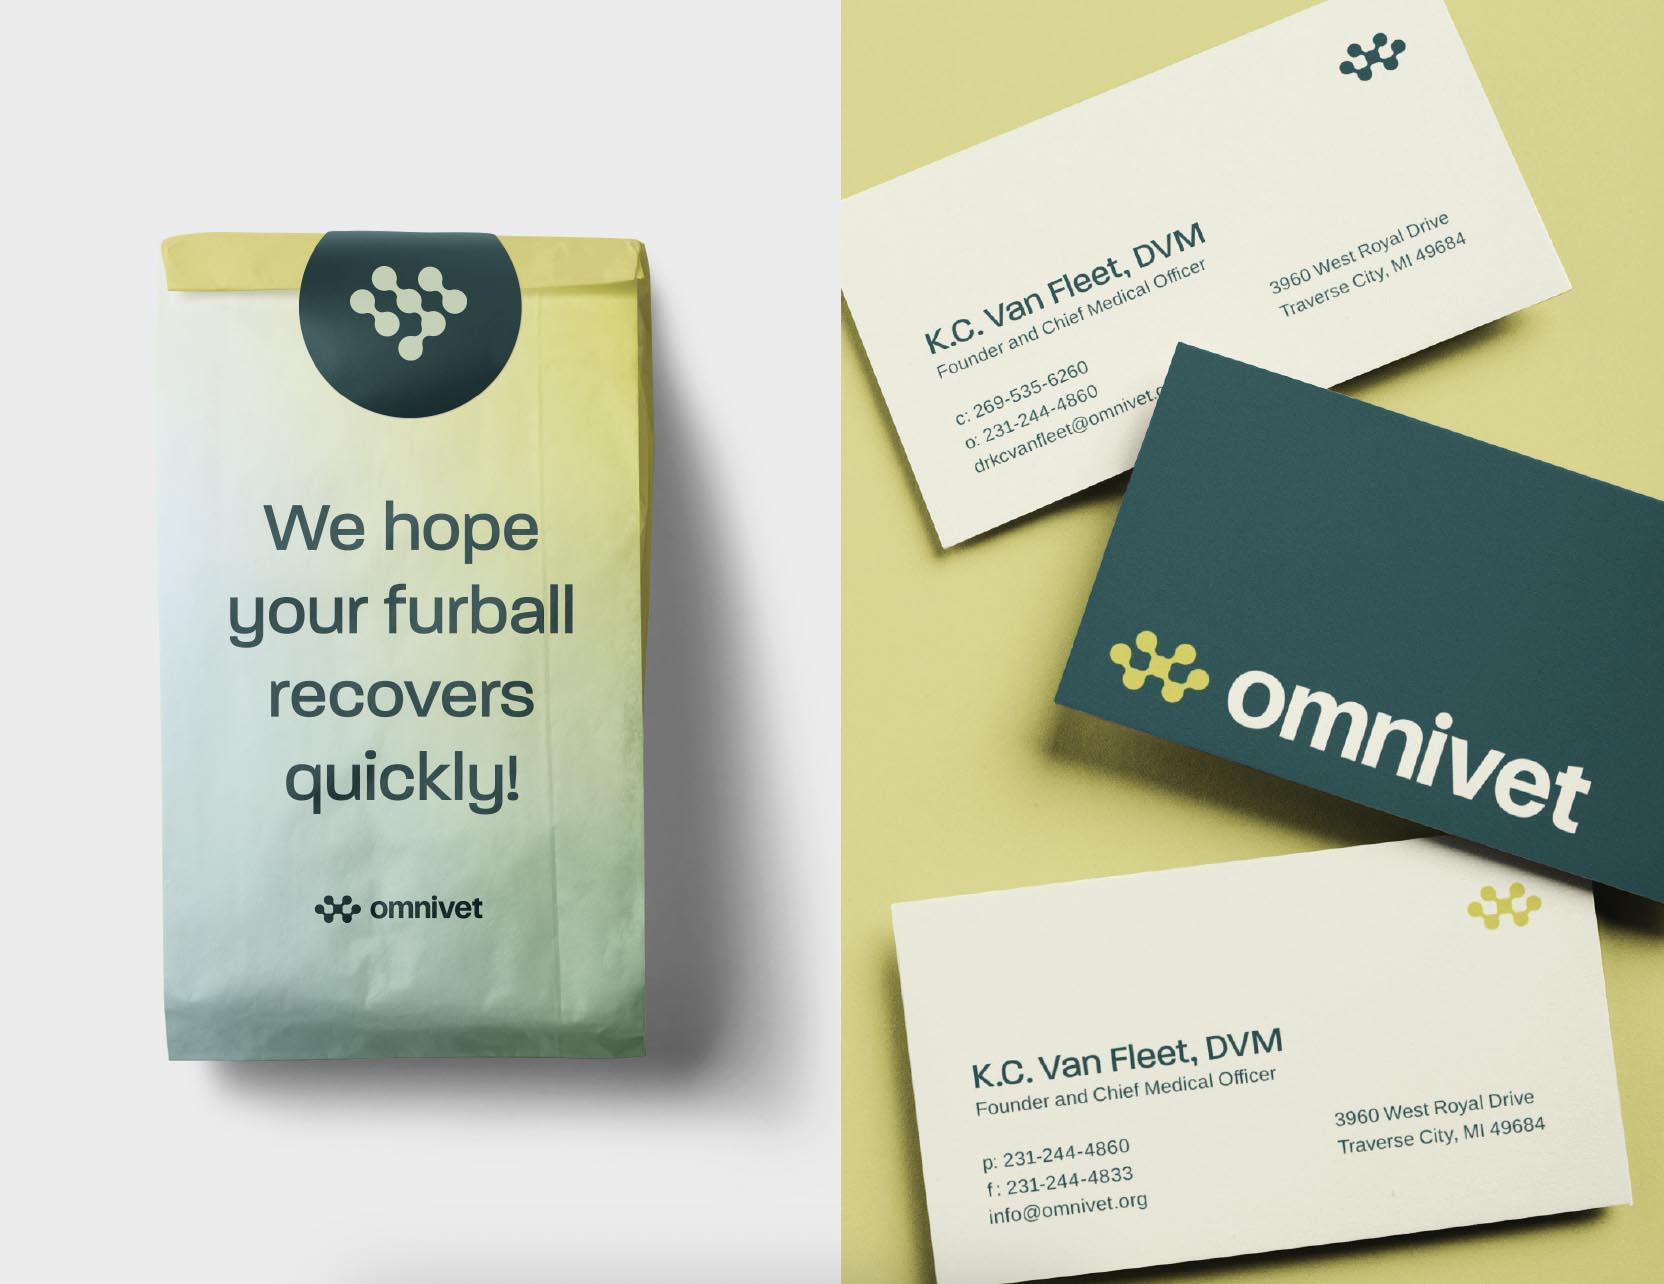 The Omnivet logo, an icon including connected dots, is displayed on a take-home prescription bag and business cards.